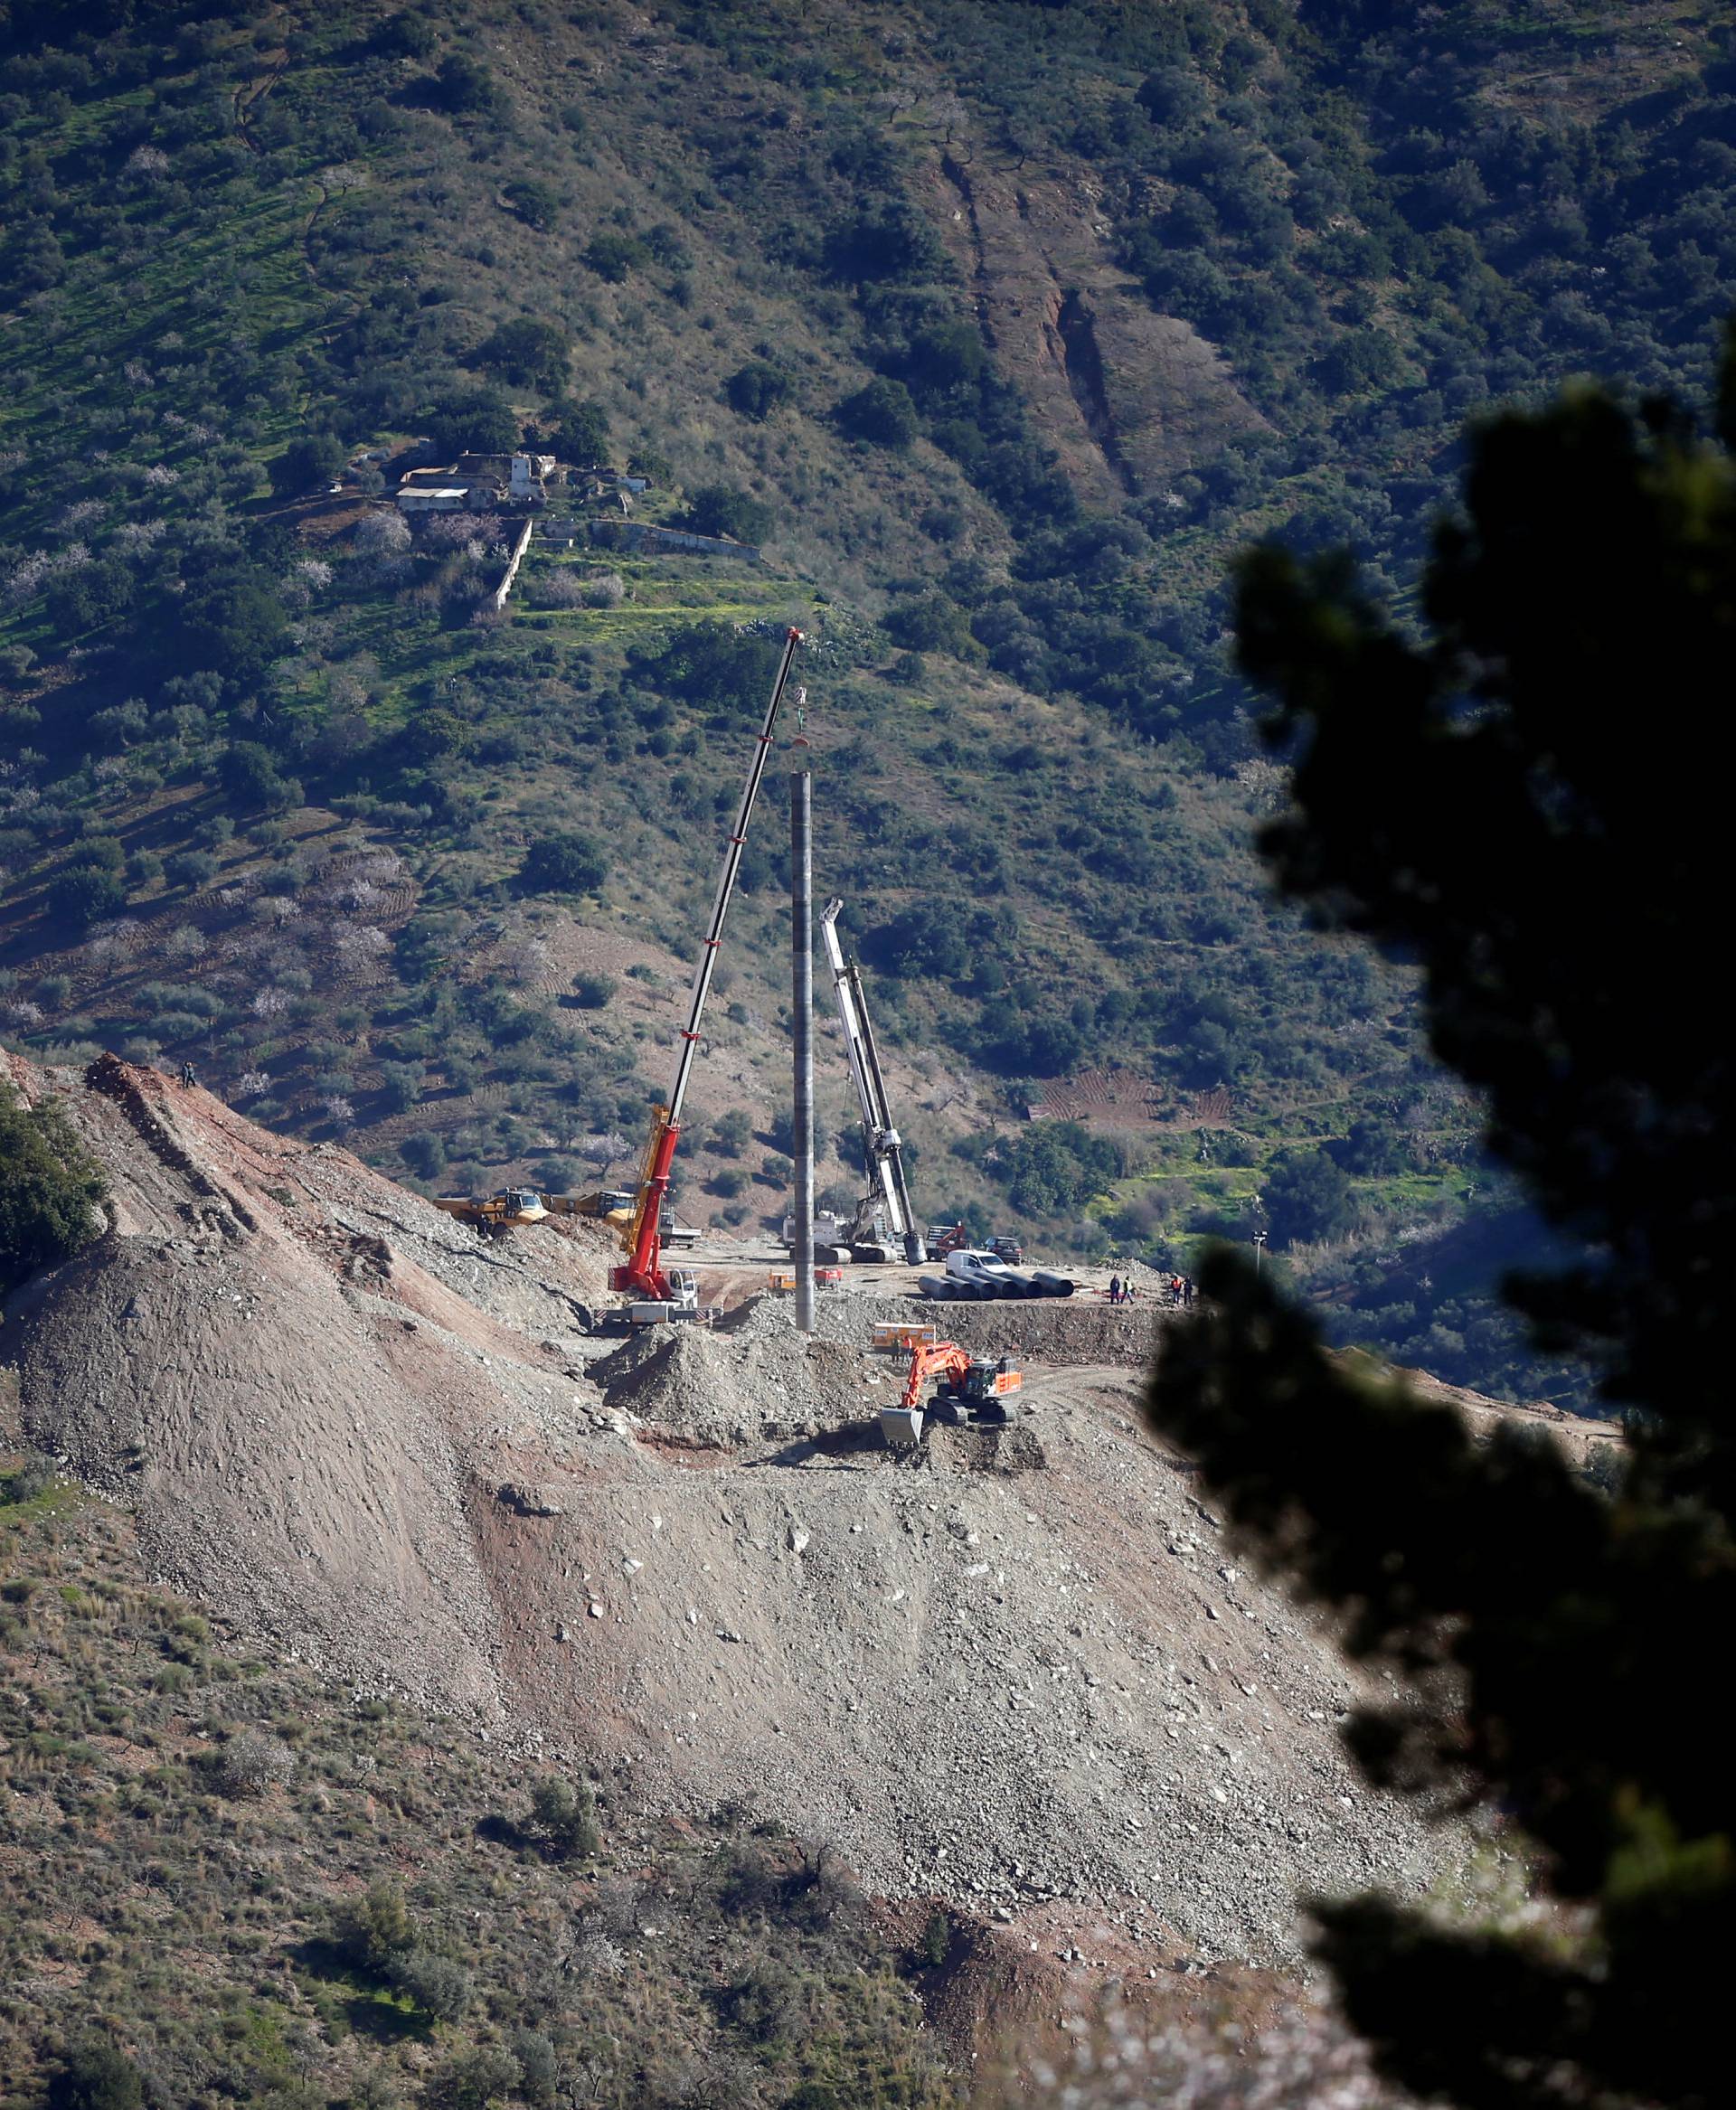 A crane removes steel tubes after failing to place them into the drilled well at the area where Julen, a Spanish two-year-old boy, fell into a deep well nine days ago when the family was taking a stroll through a private estate, in Totalan